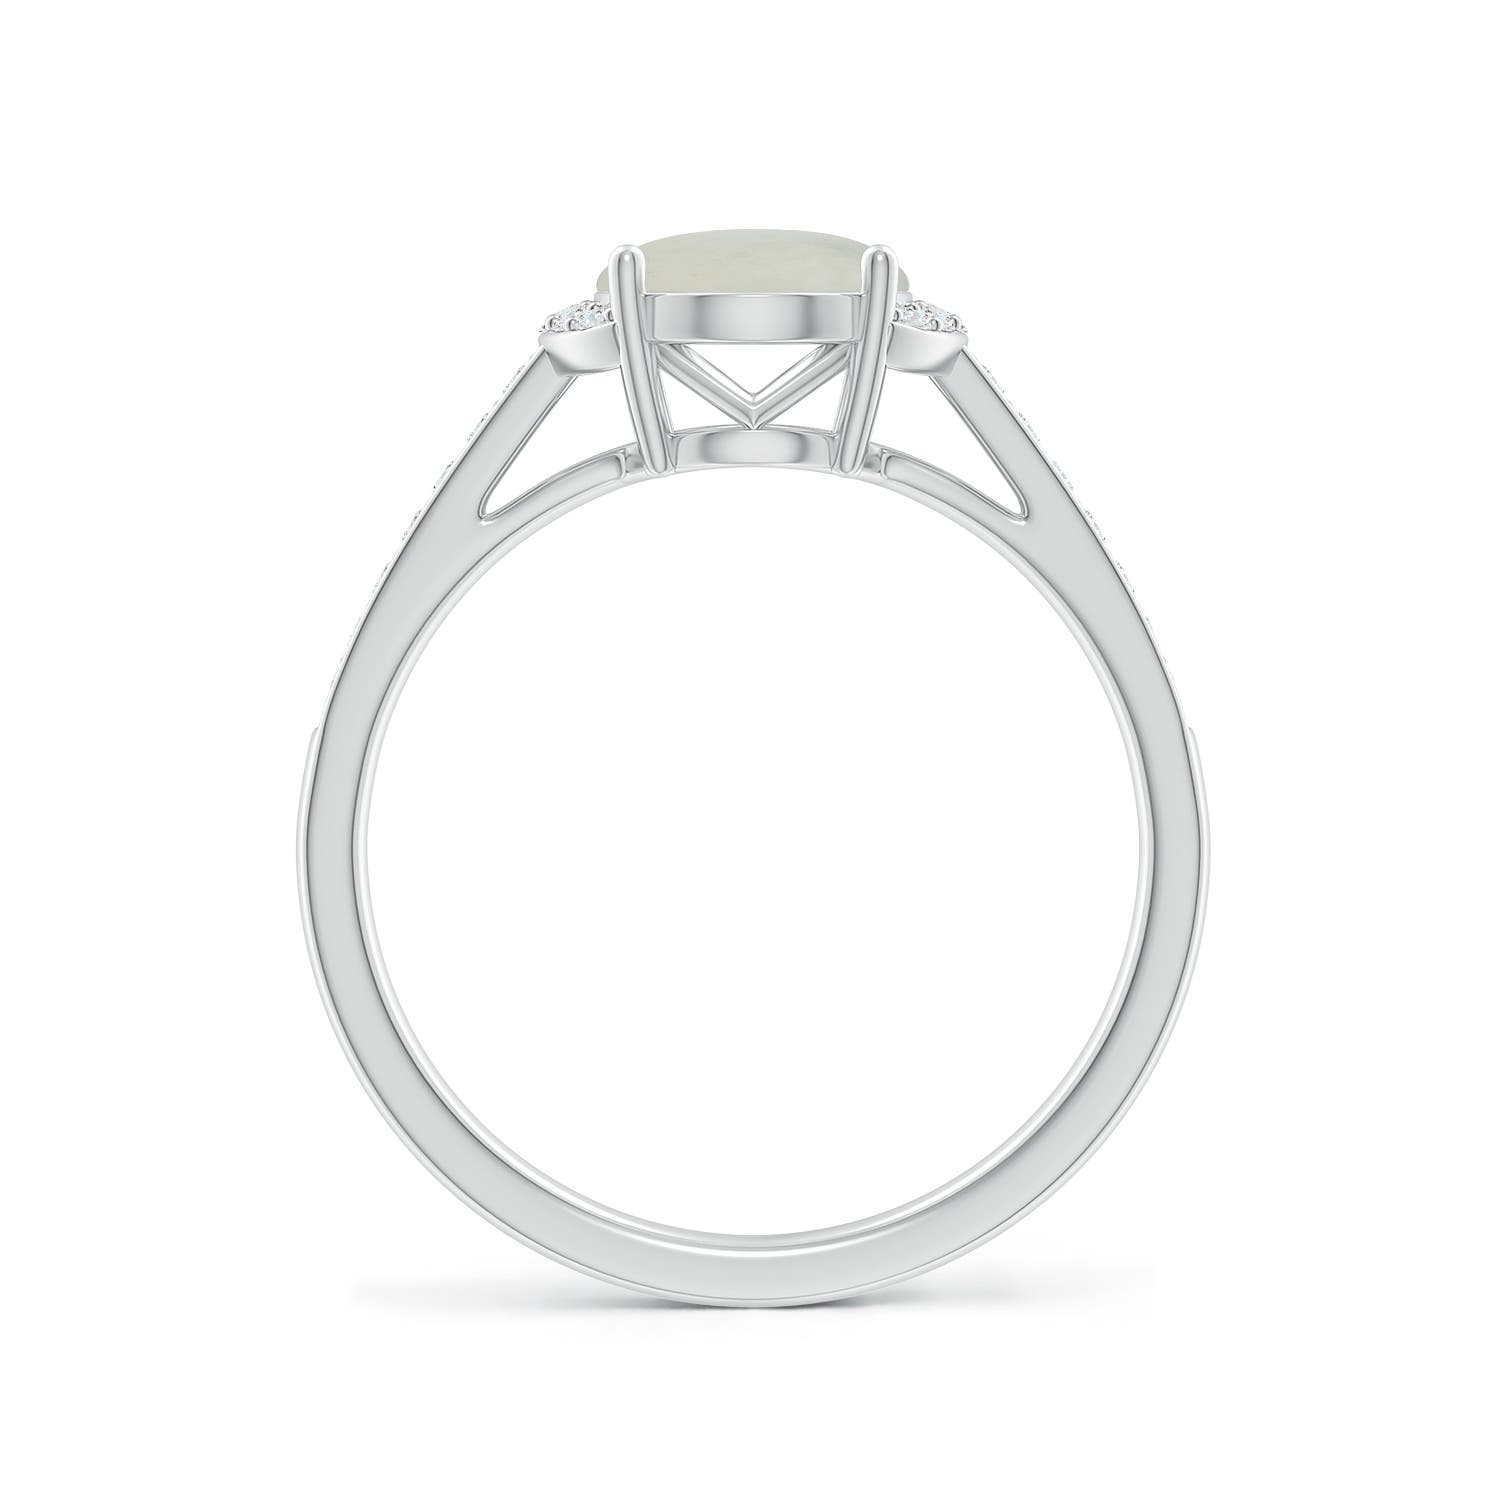 A - Moonstone / 1.88 CT / 14 KT White Gold